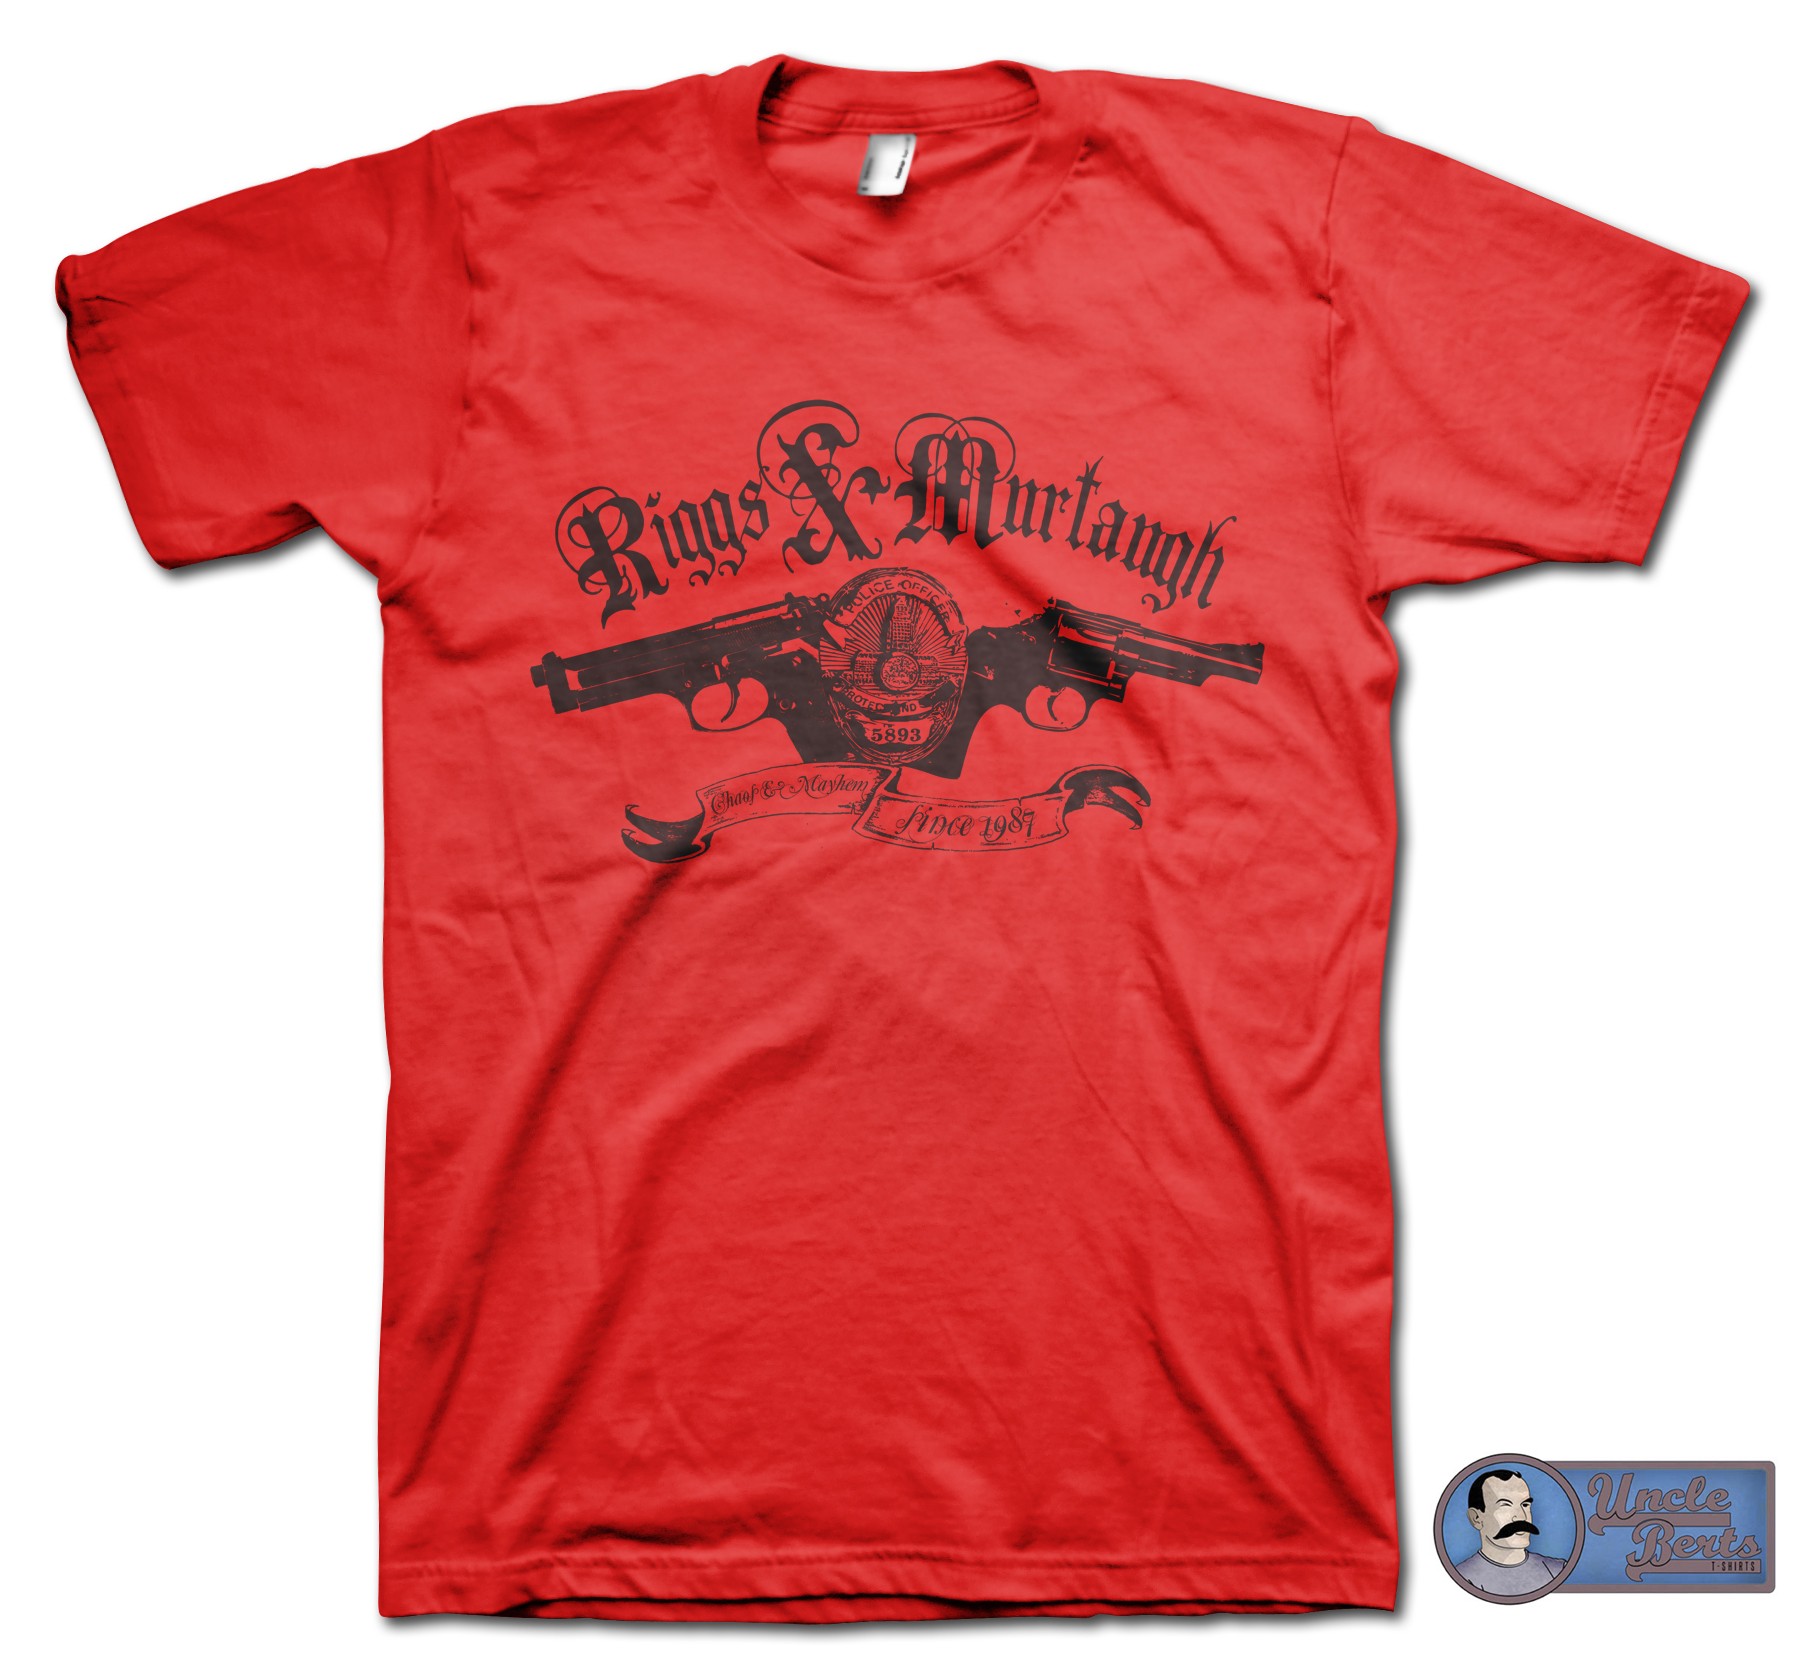 Leathal Weapon (1975) inspired Riggs & Murtaugh T-Shirt